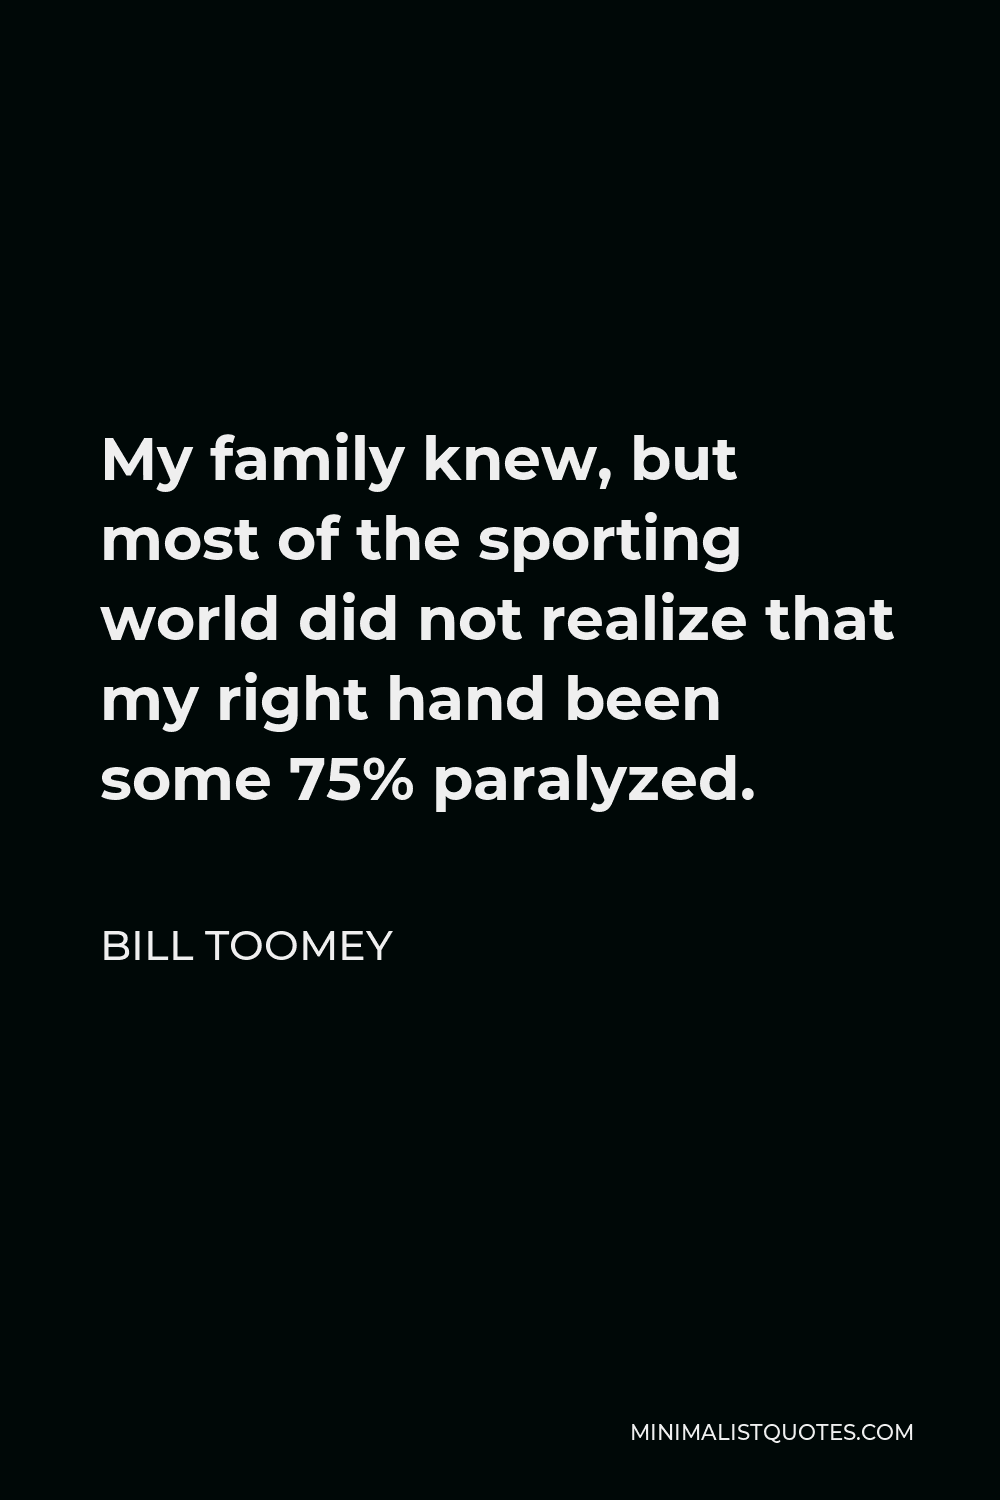 Bill Toomey Quote - My family knew, but most of the sporting world did not realize that my right hand been some 75% paralyzed.